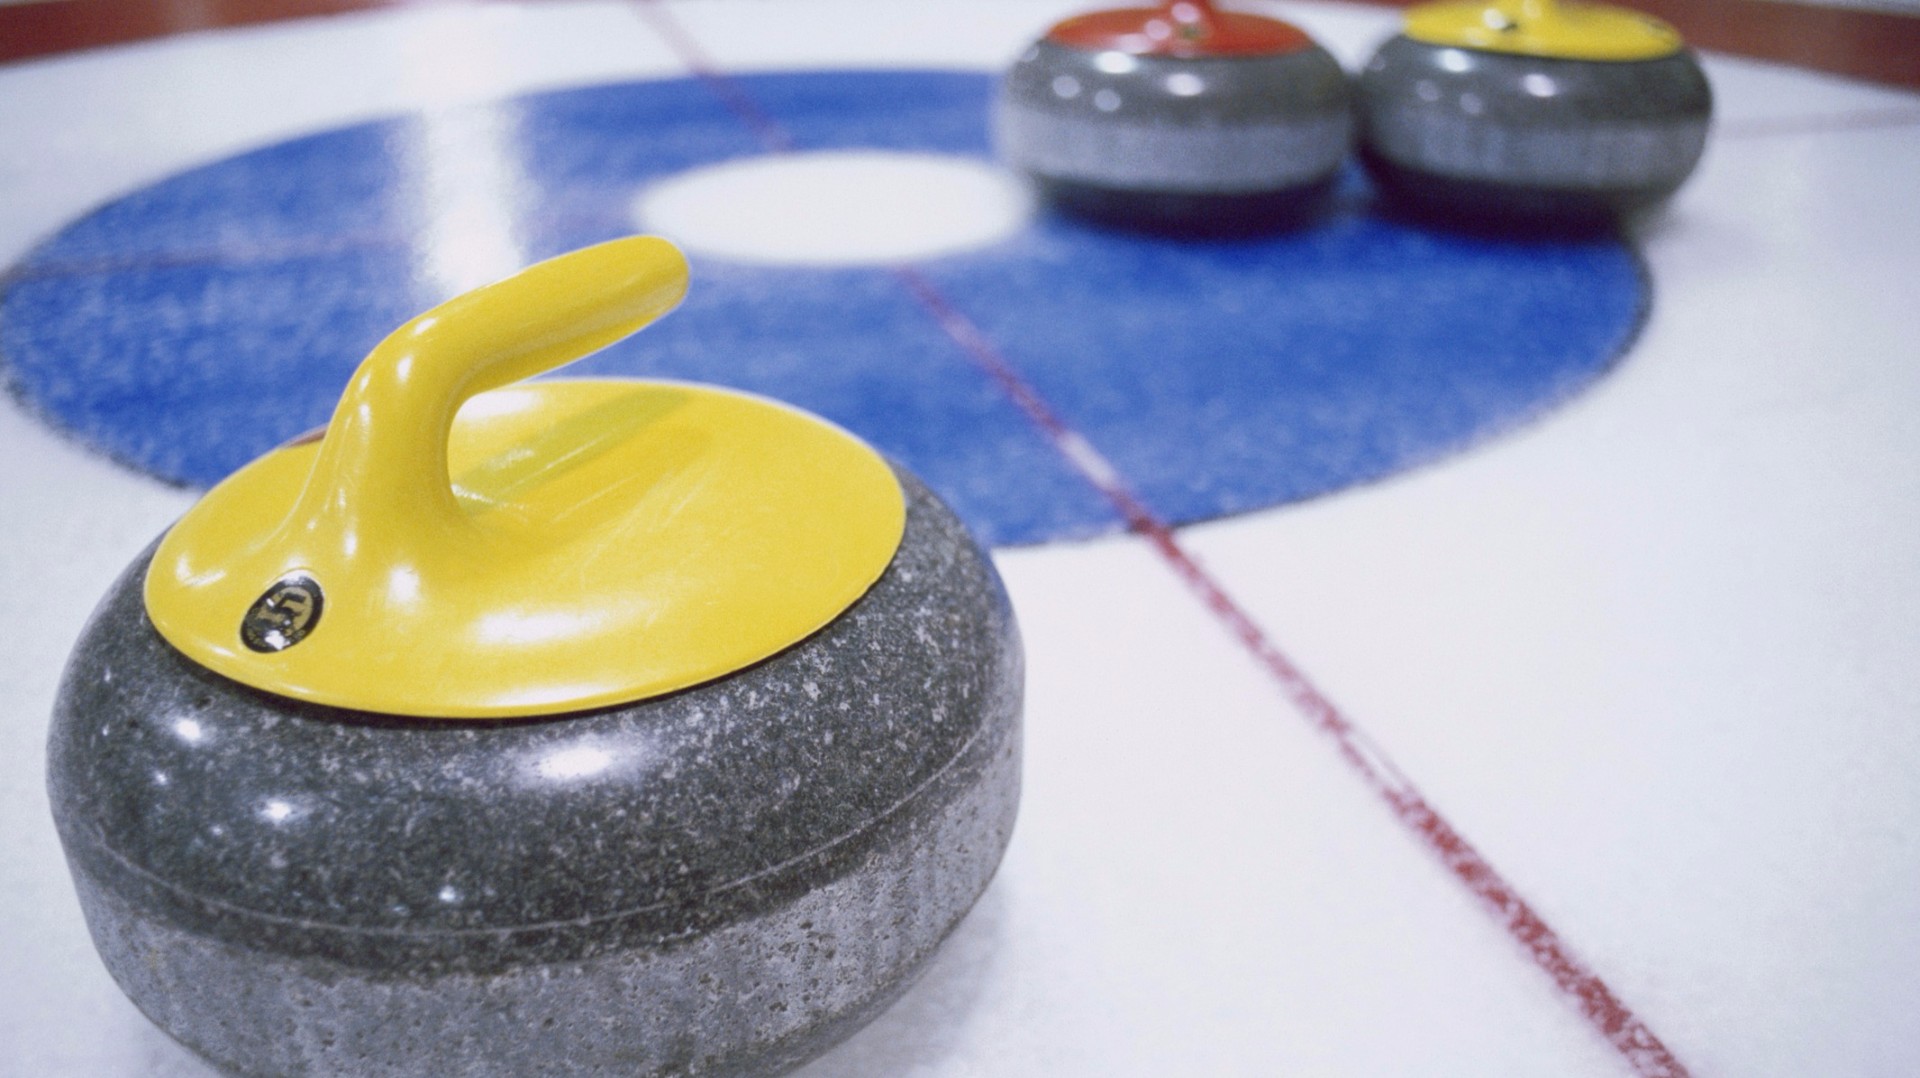 Desert to ice: Qatar takes on curling at Asian Winter Games - WHAS11.com